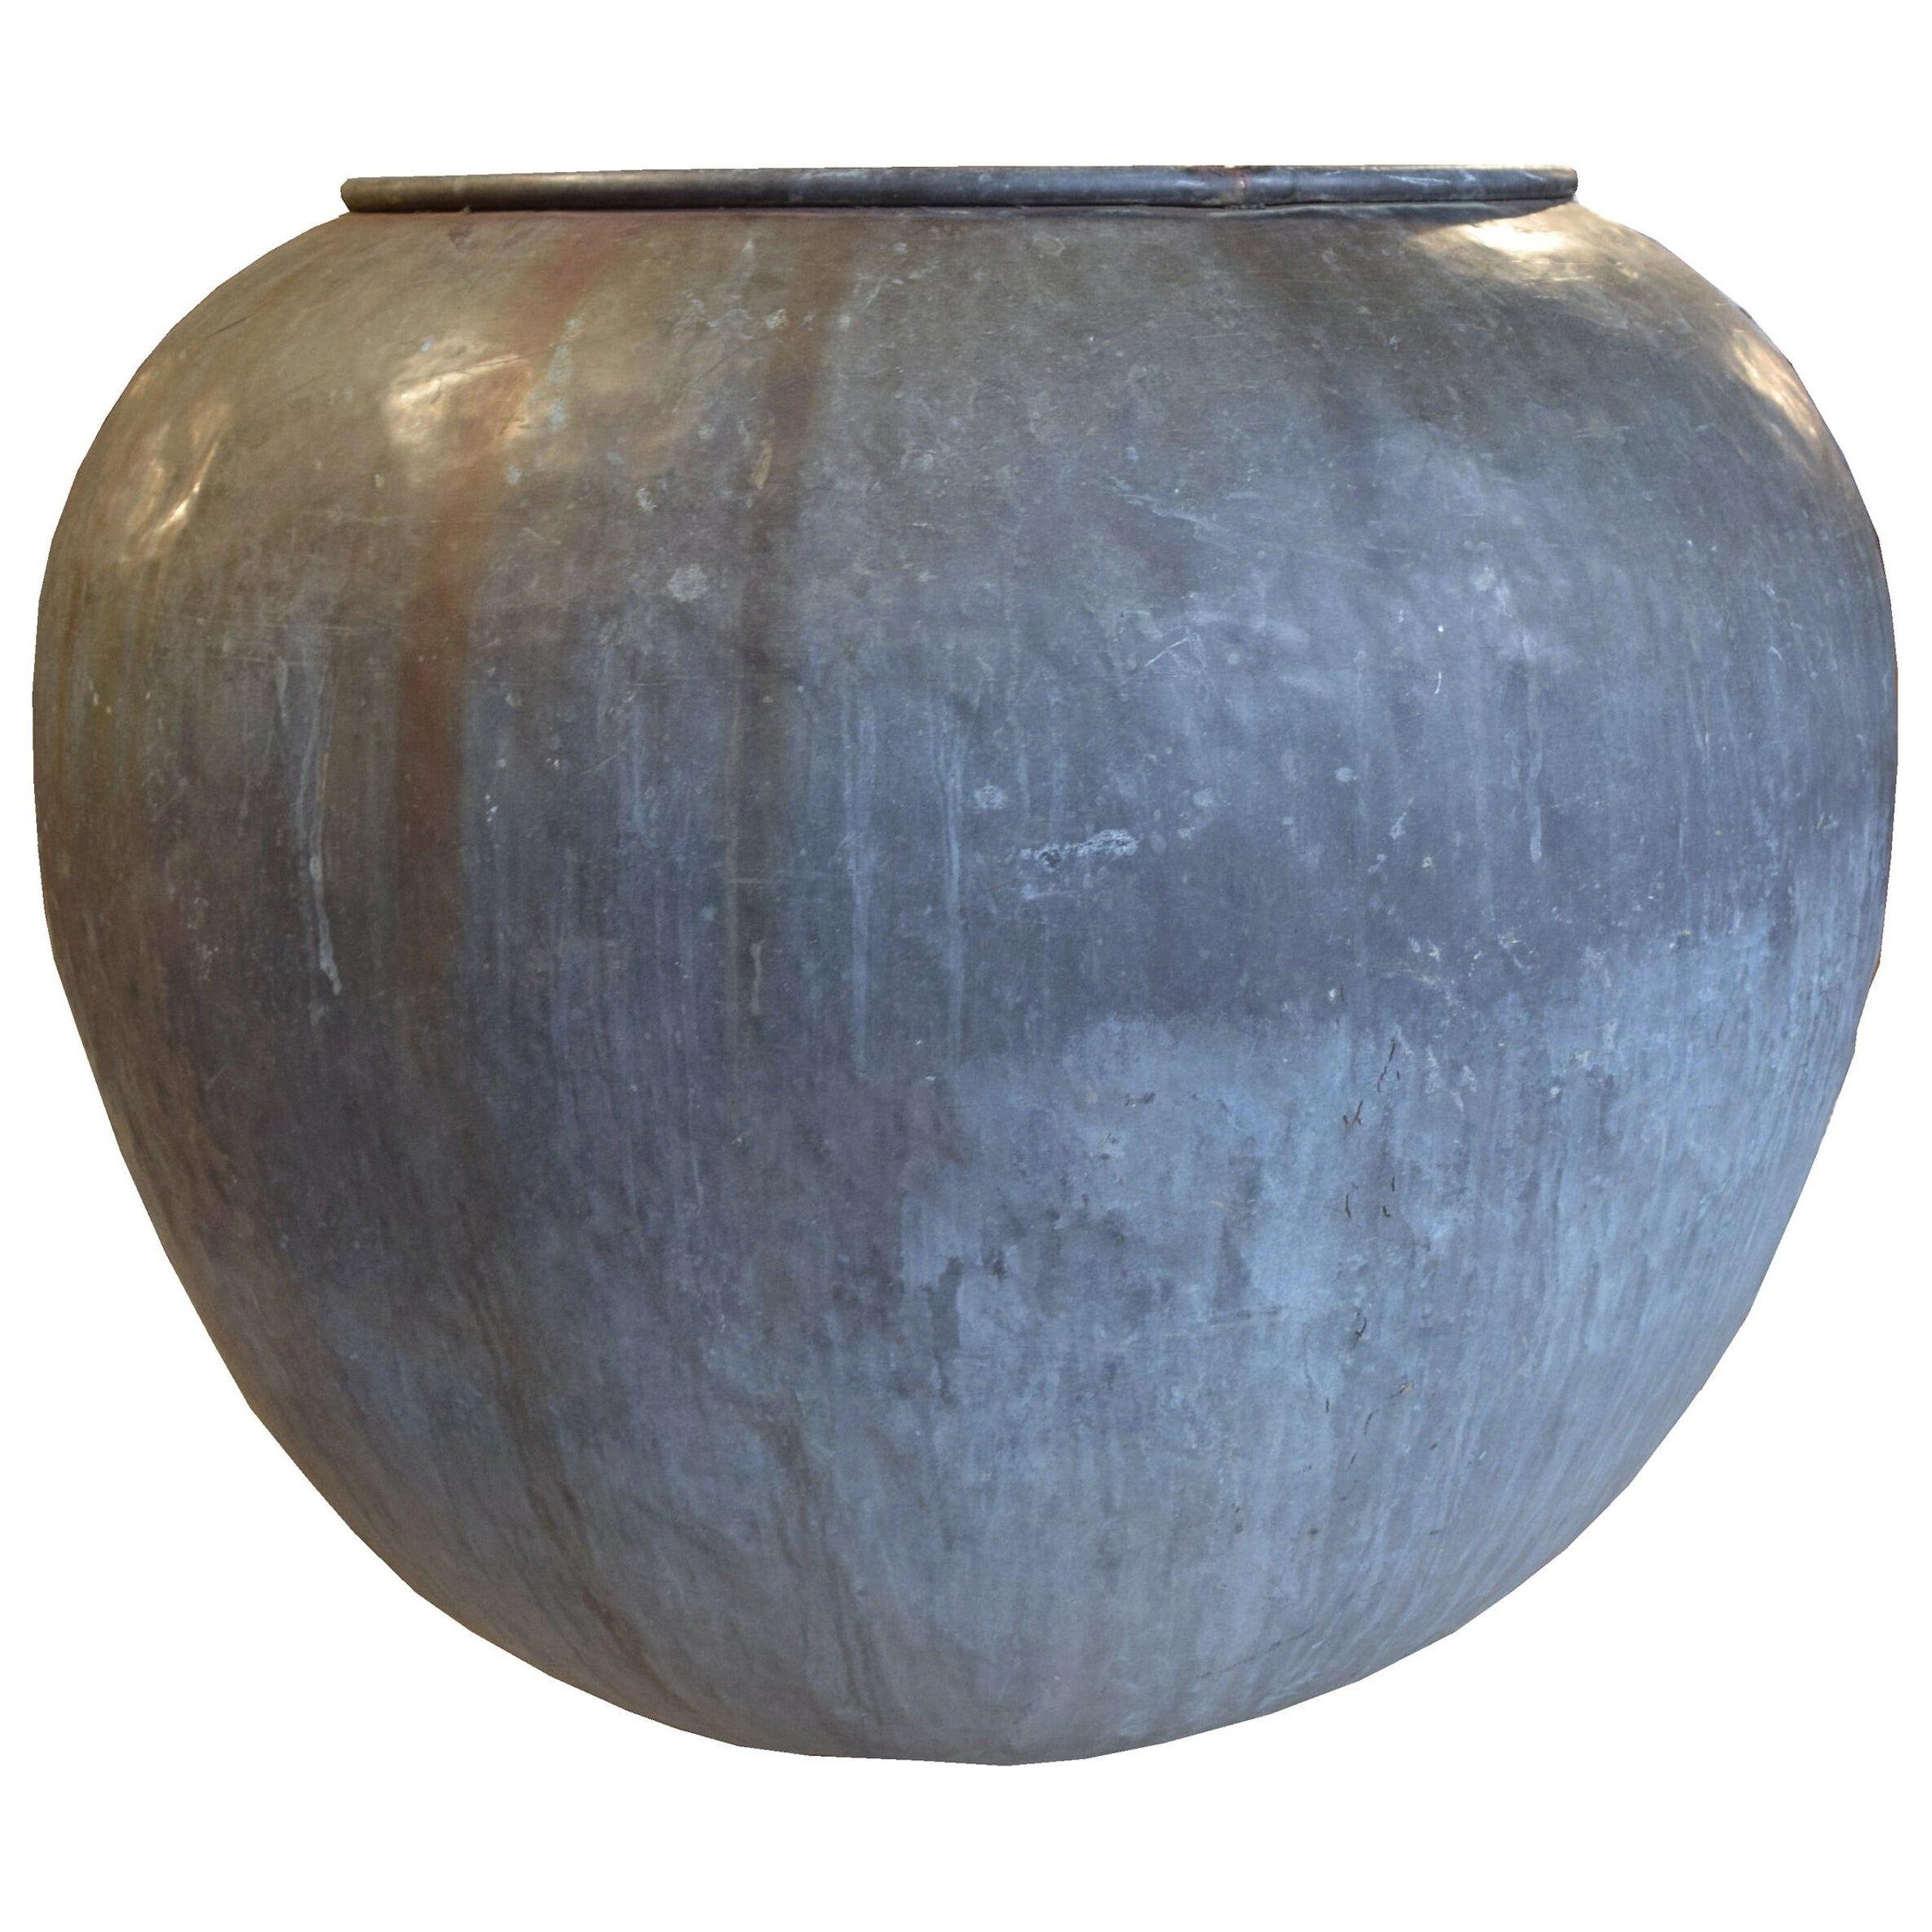 American Copper Vessel from Acme Coppersmithing